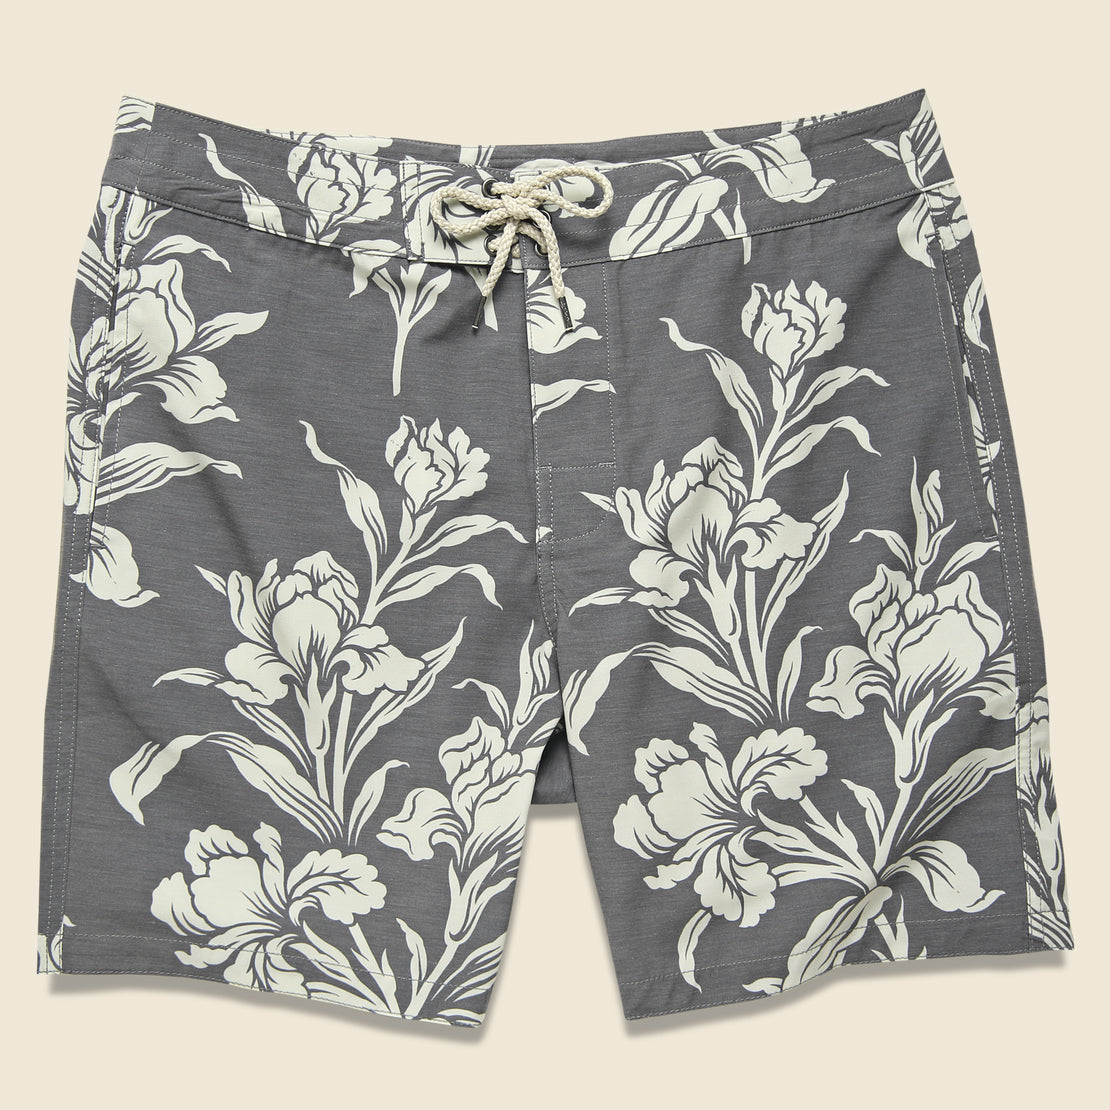 Faherty Classic 7" Boardshort - Black Floral